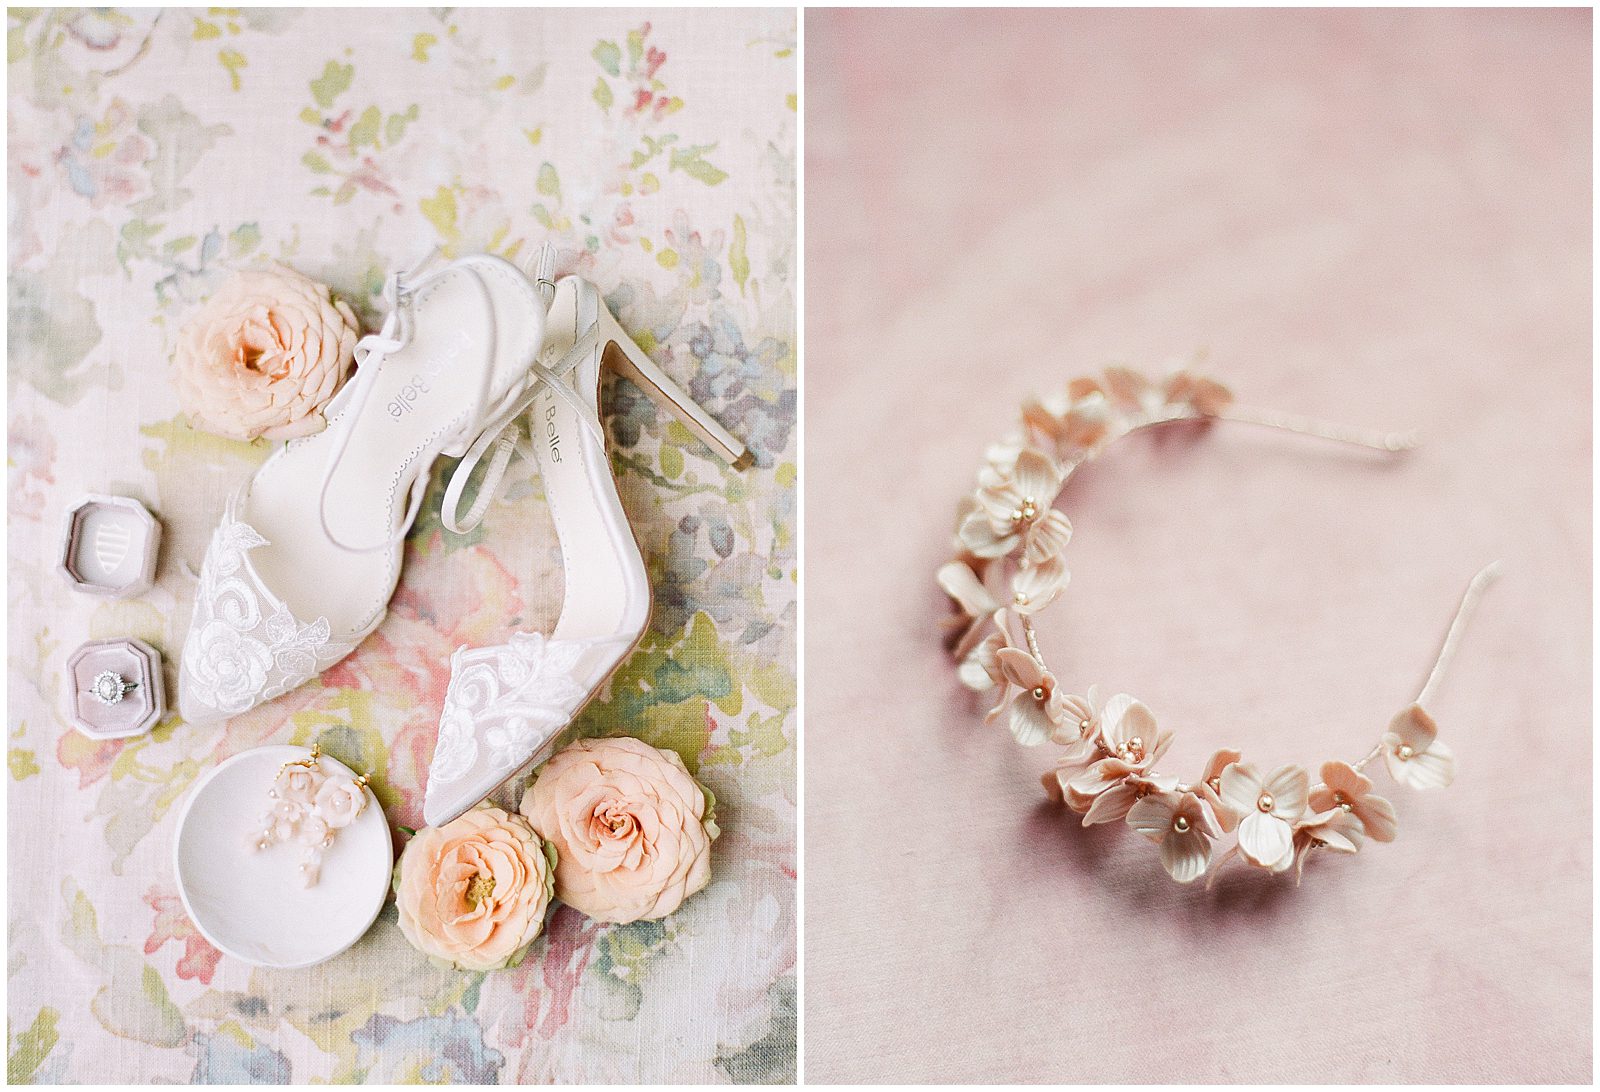 Central Park Wedding Bridal Details Shoes Earrings and Headband Photos